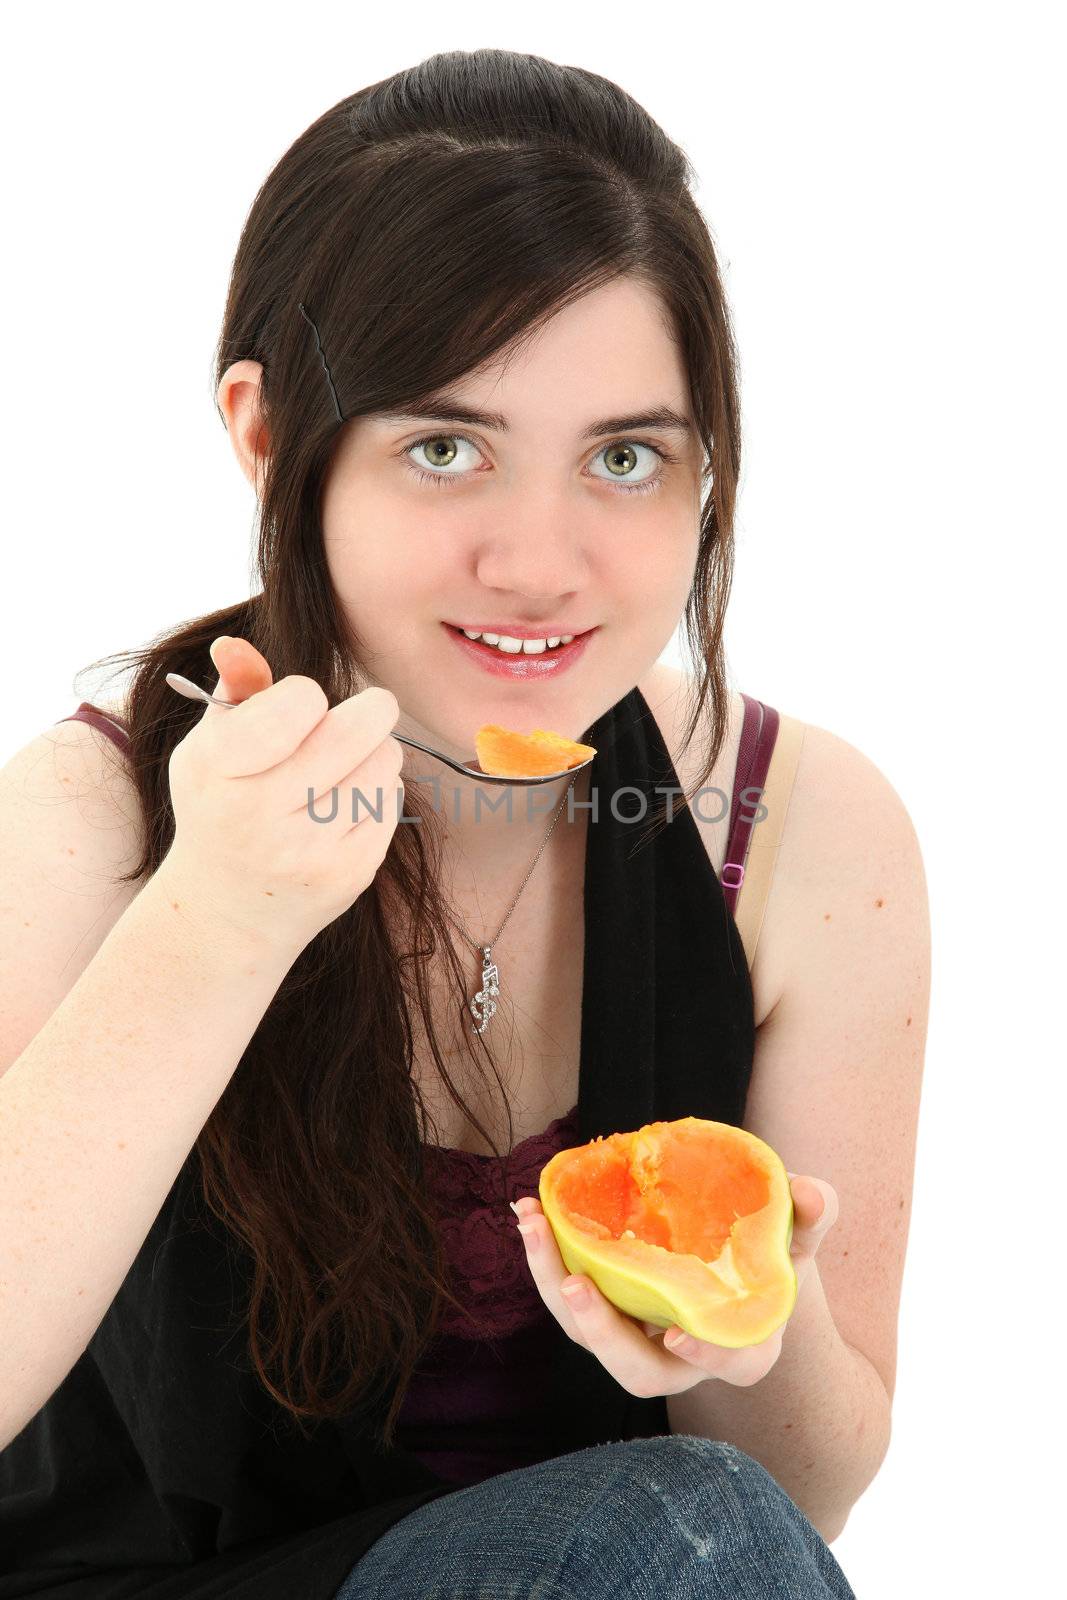 Attractive young woman eating a papaya fruit over white background.